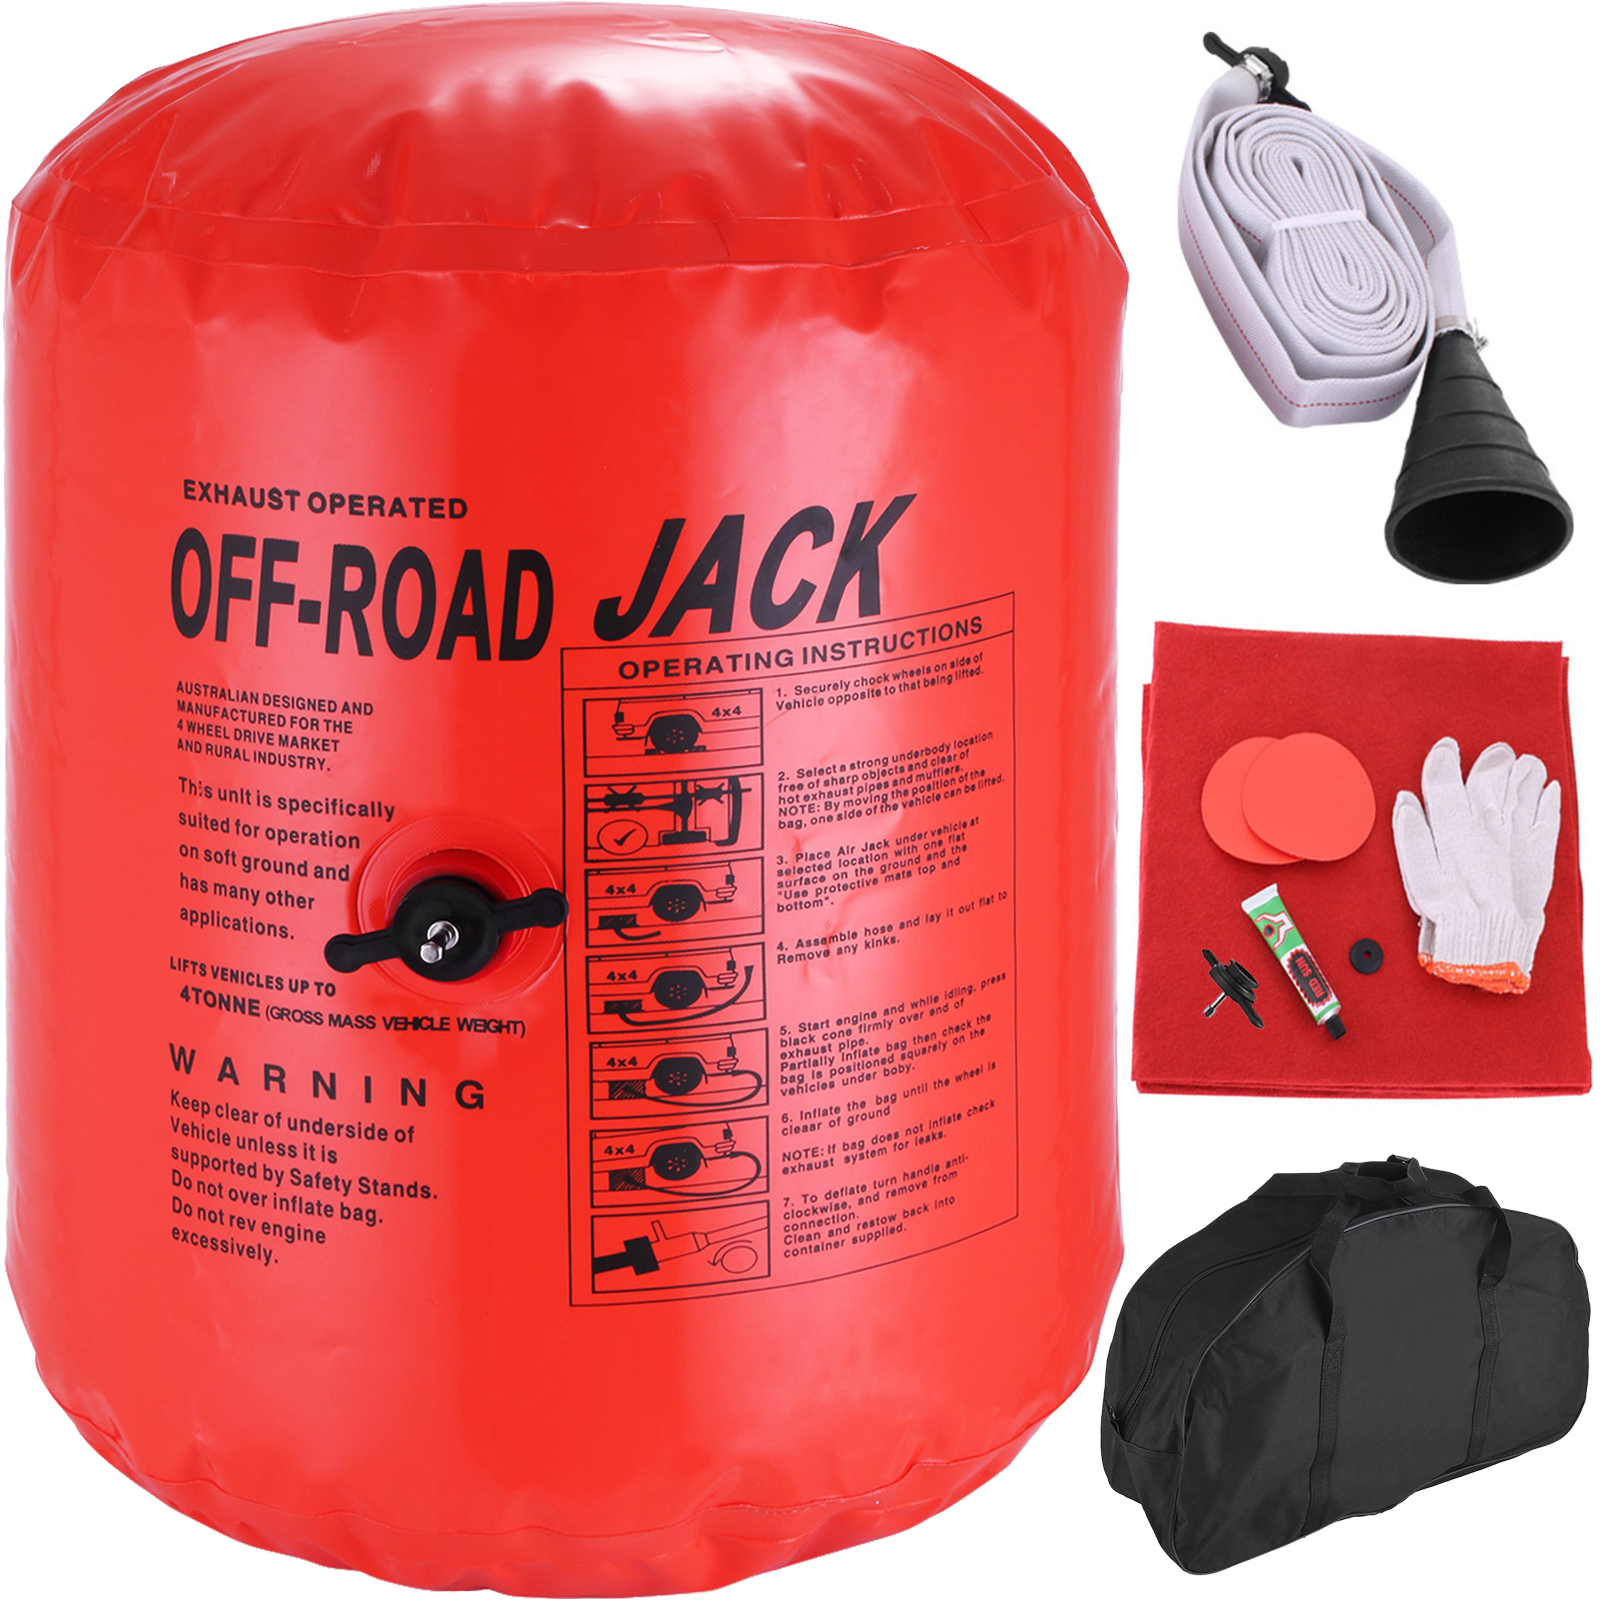 Air Jack Exhaust 4x4 Off Road 4 Tonne Lift Capacity Most Durable Hose Extension от Vevor Many GEOs